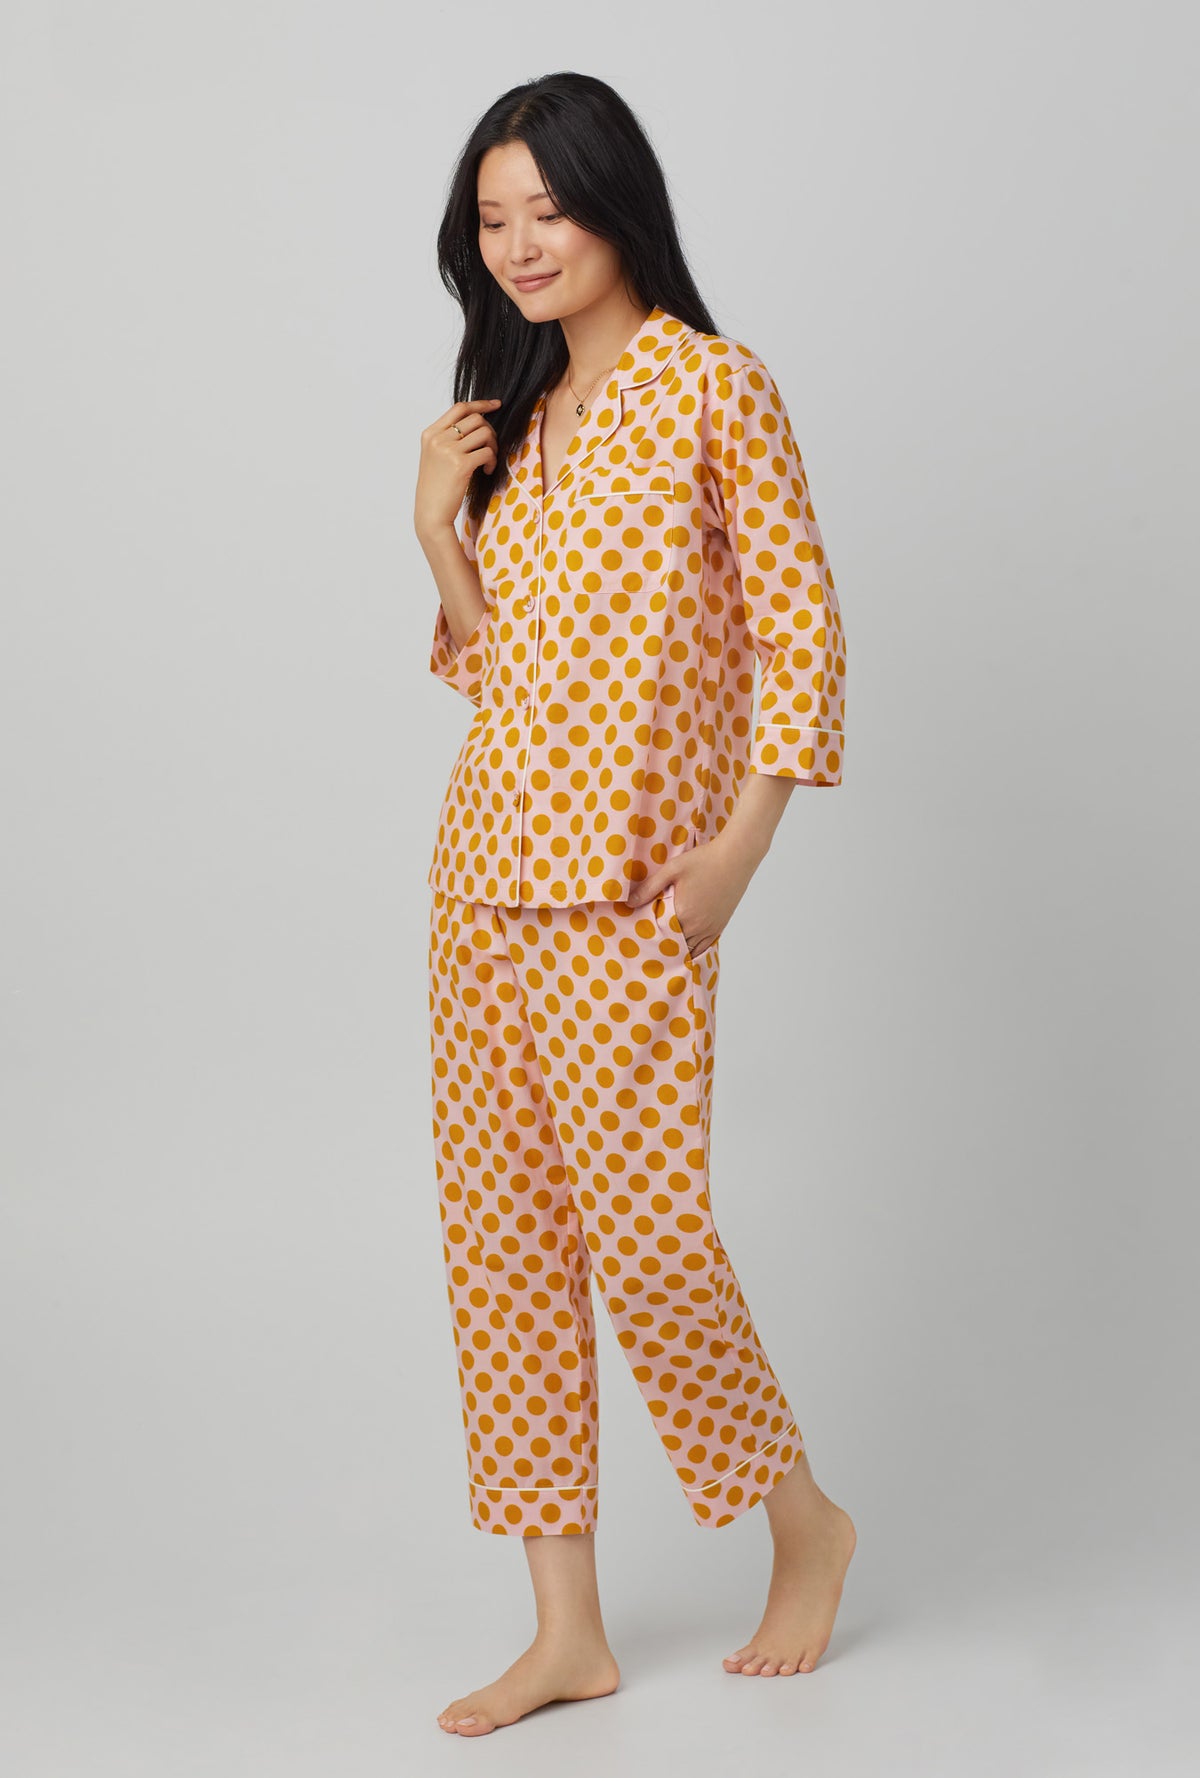 A lady wearing 3/4 sleeve classic cotton cropped pj set with call button print